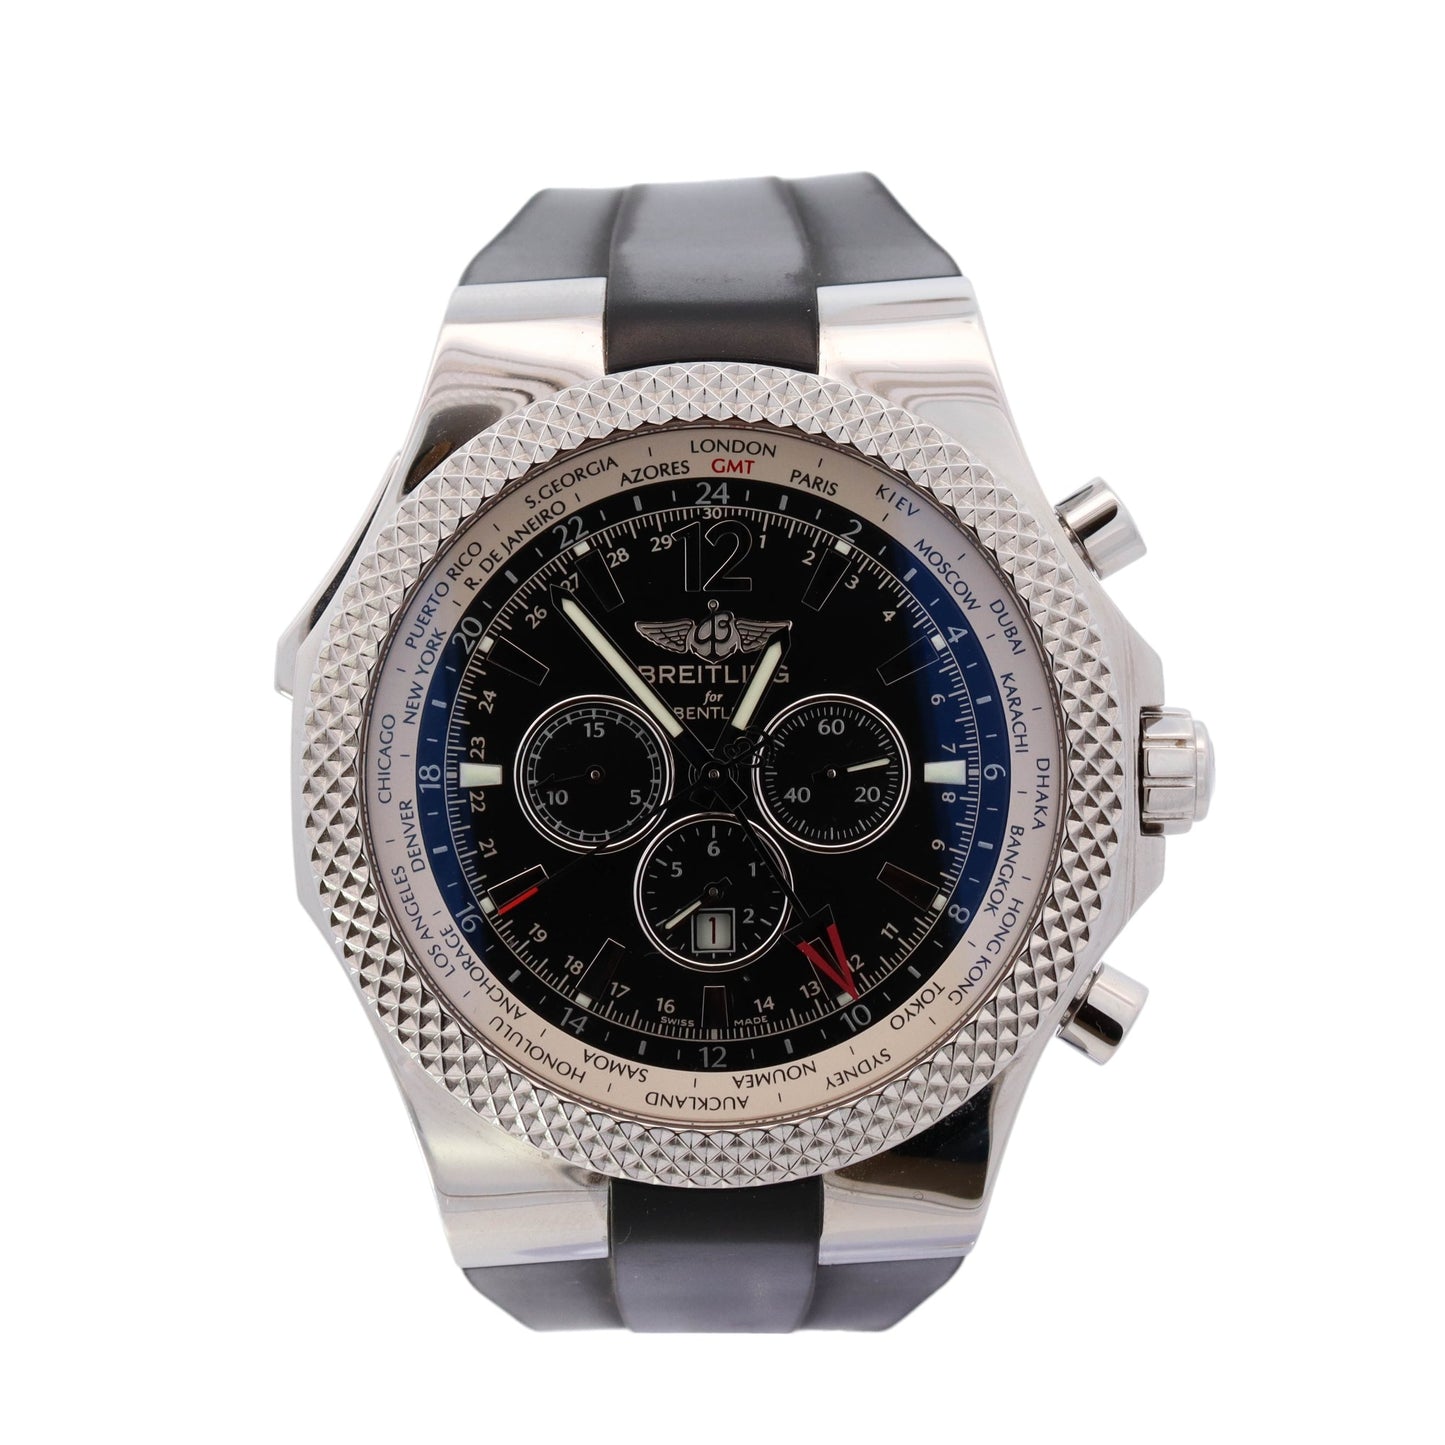 Breitling Bentley GMT Stainless Steel 49mm Black Chronograph Dial Watch Reference# A47362 - Happy Jewelers Fine Jewelry Lifetime Warranty